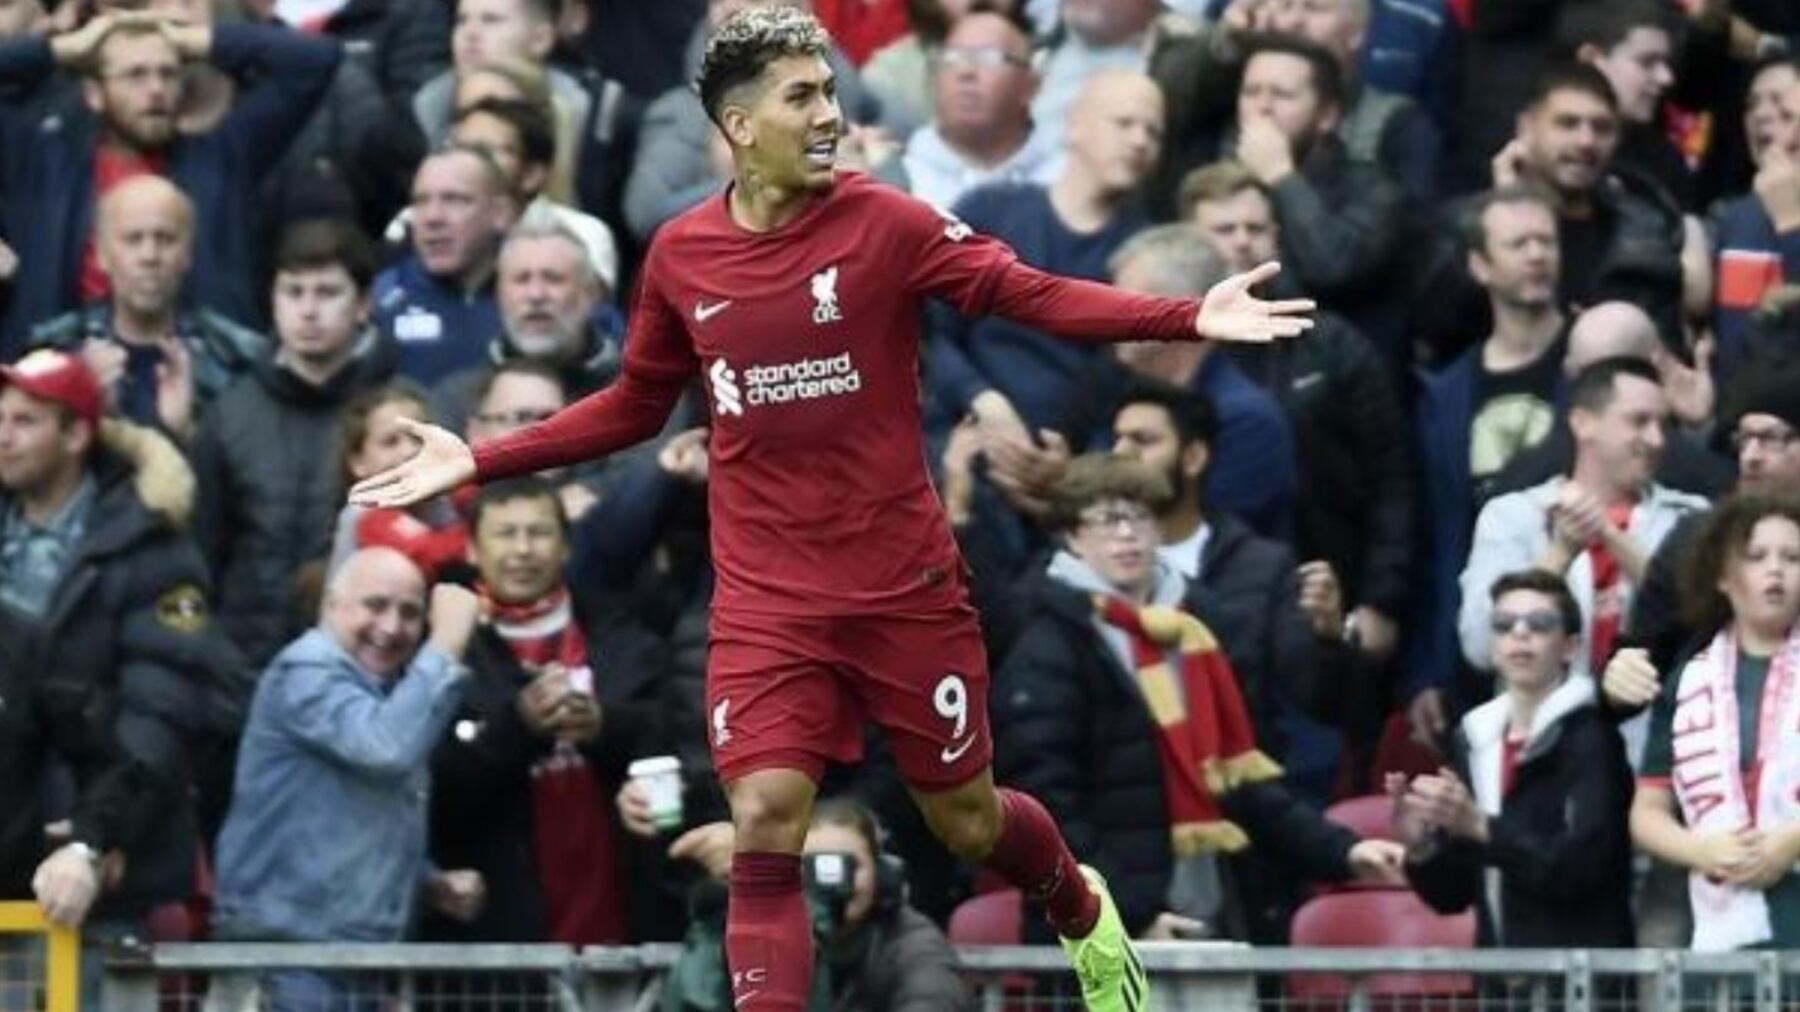 Roberto Firmino is still a fundamental part of Liverpool's attack, was Darwin Núñez's transfer a wrong call?